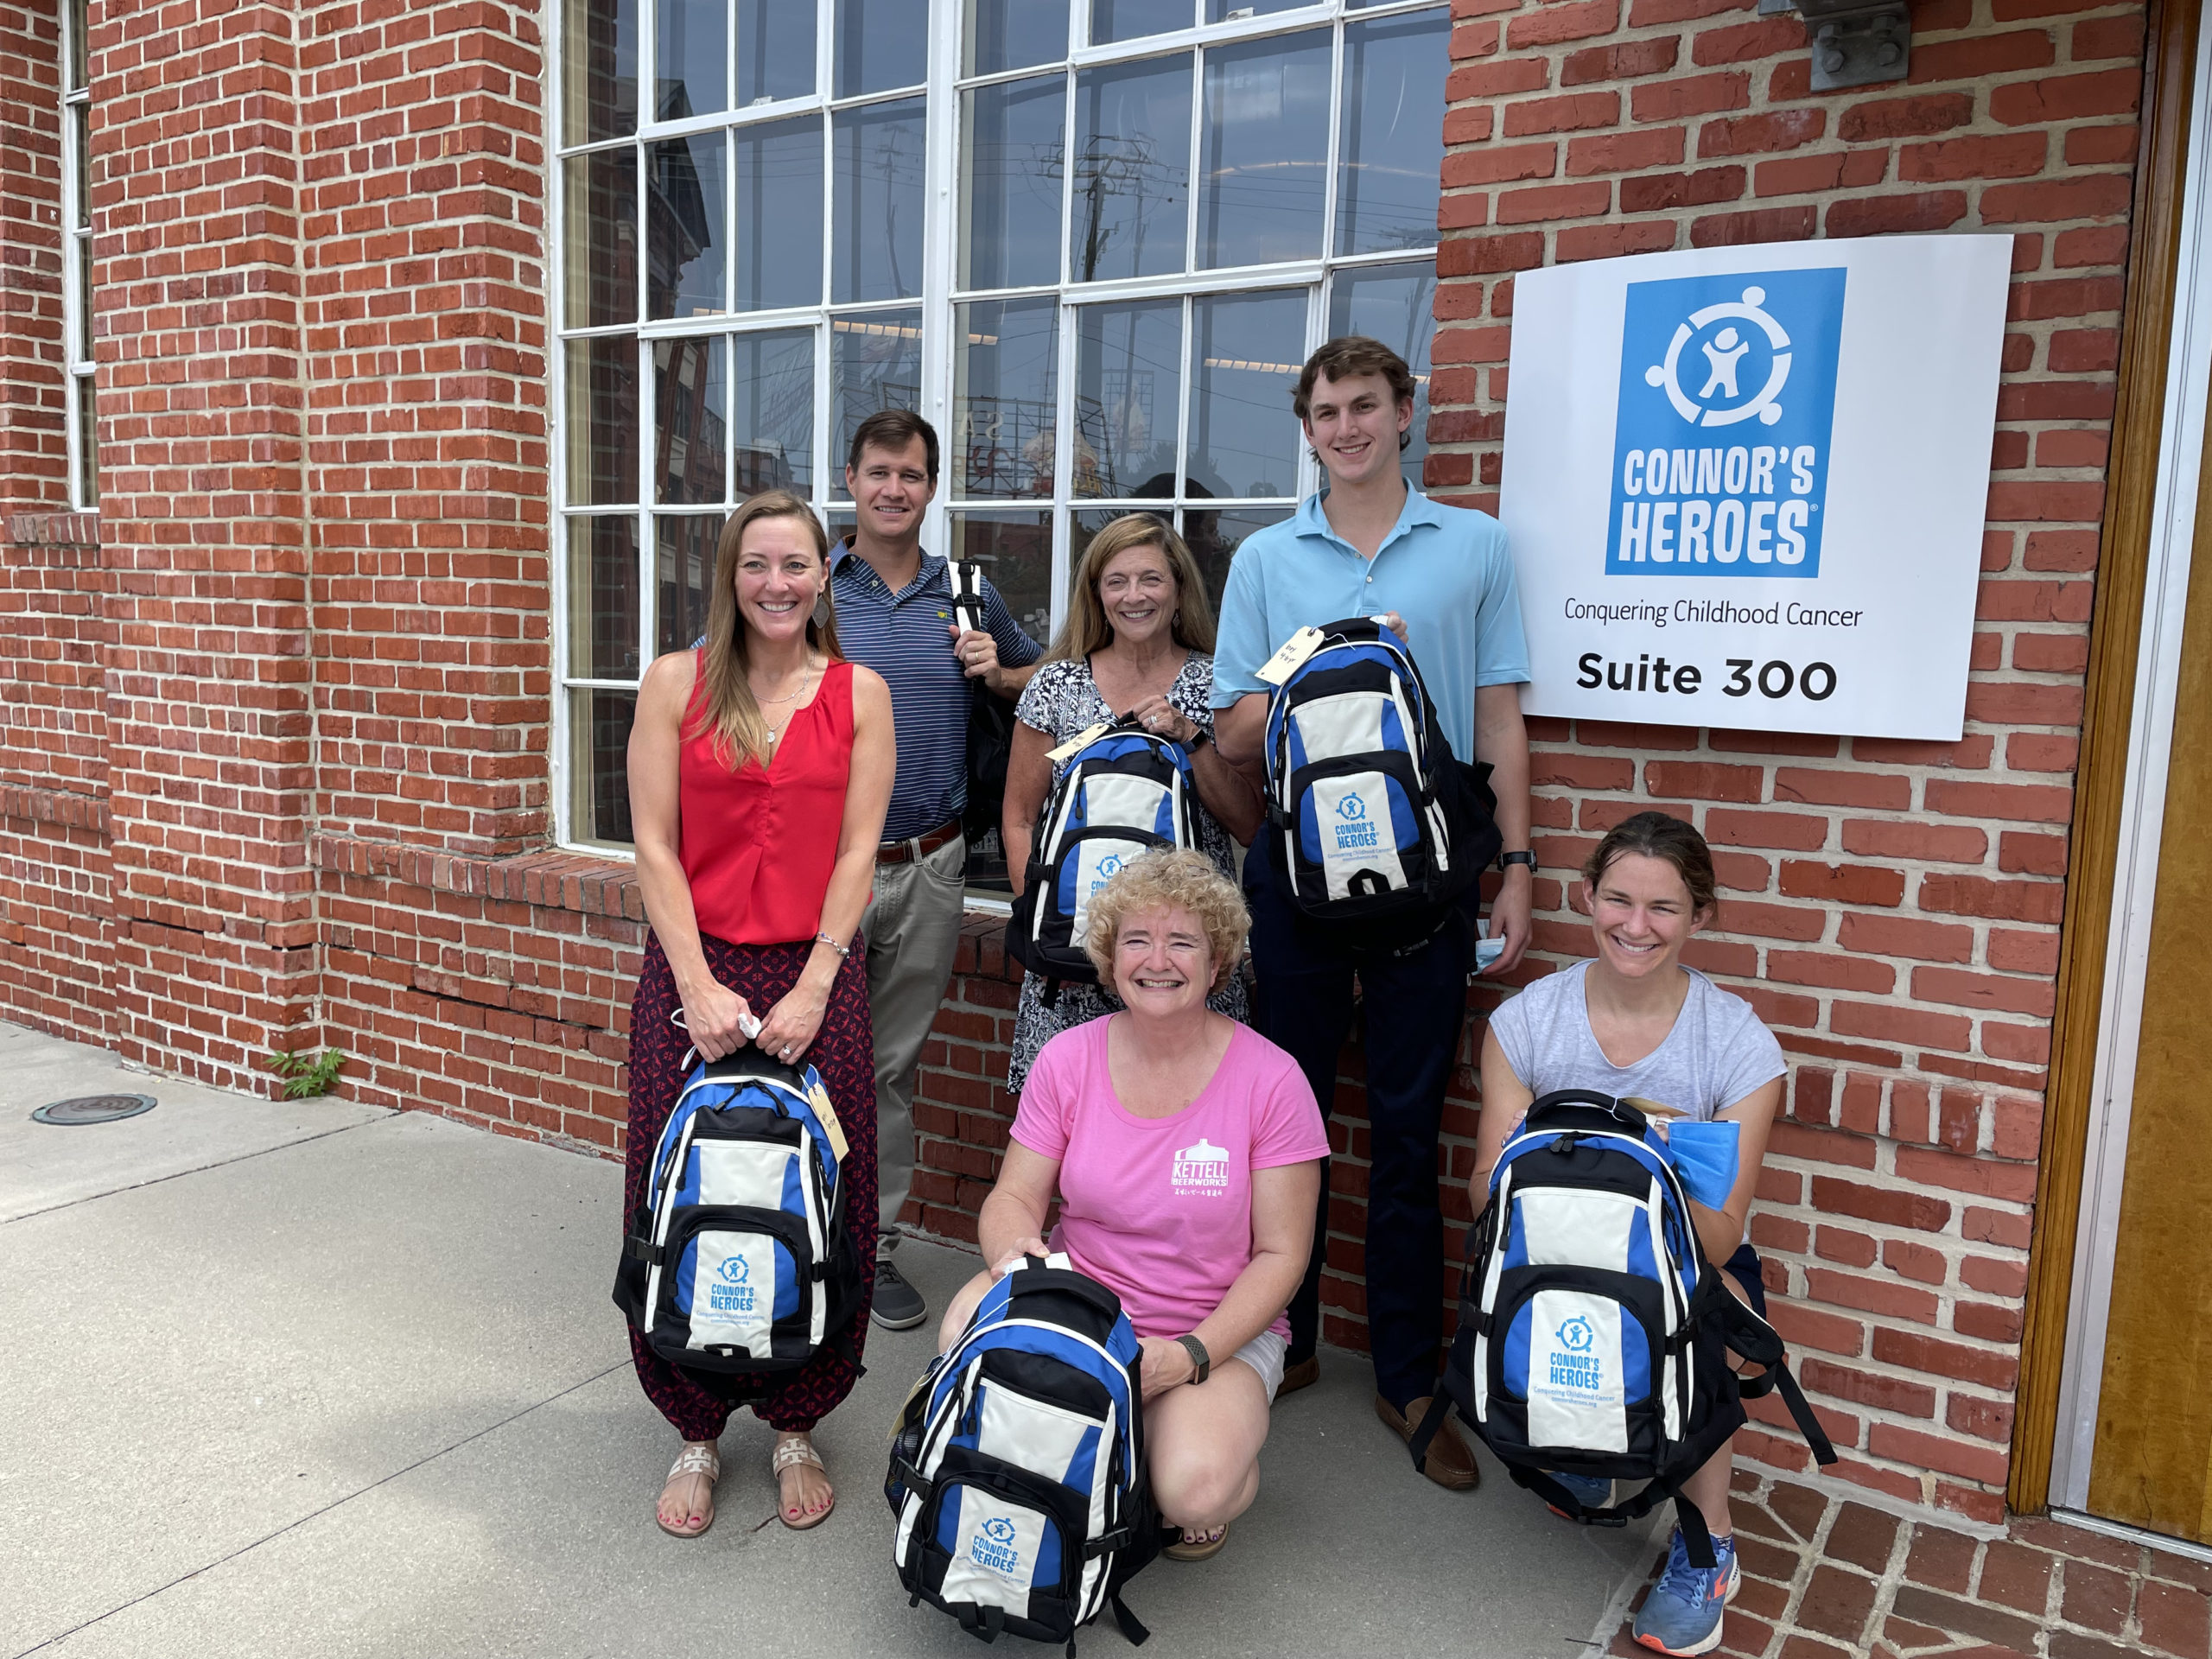 Image A group of six people holding backpacks standing outside of the Connors Heroes office